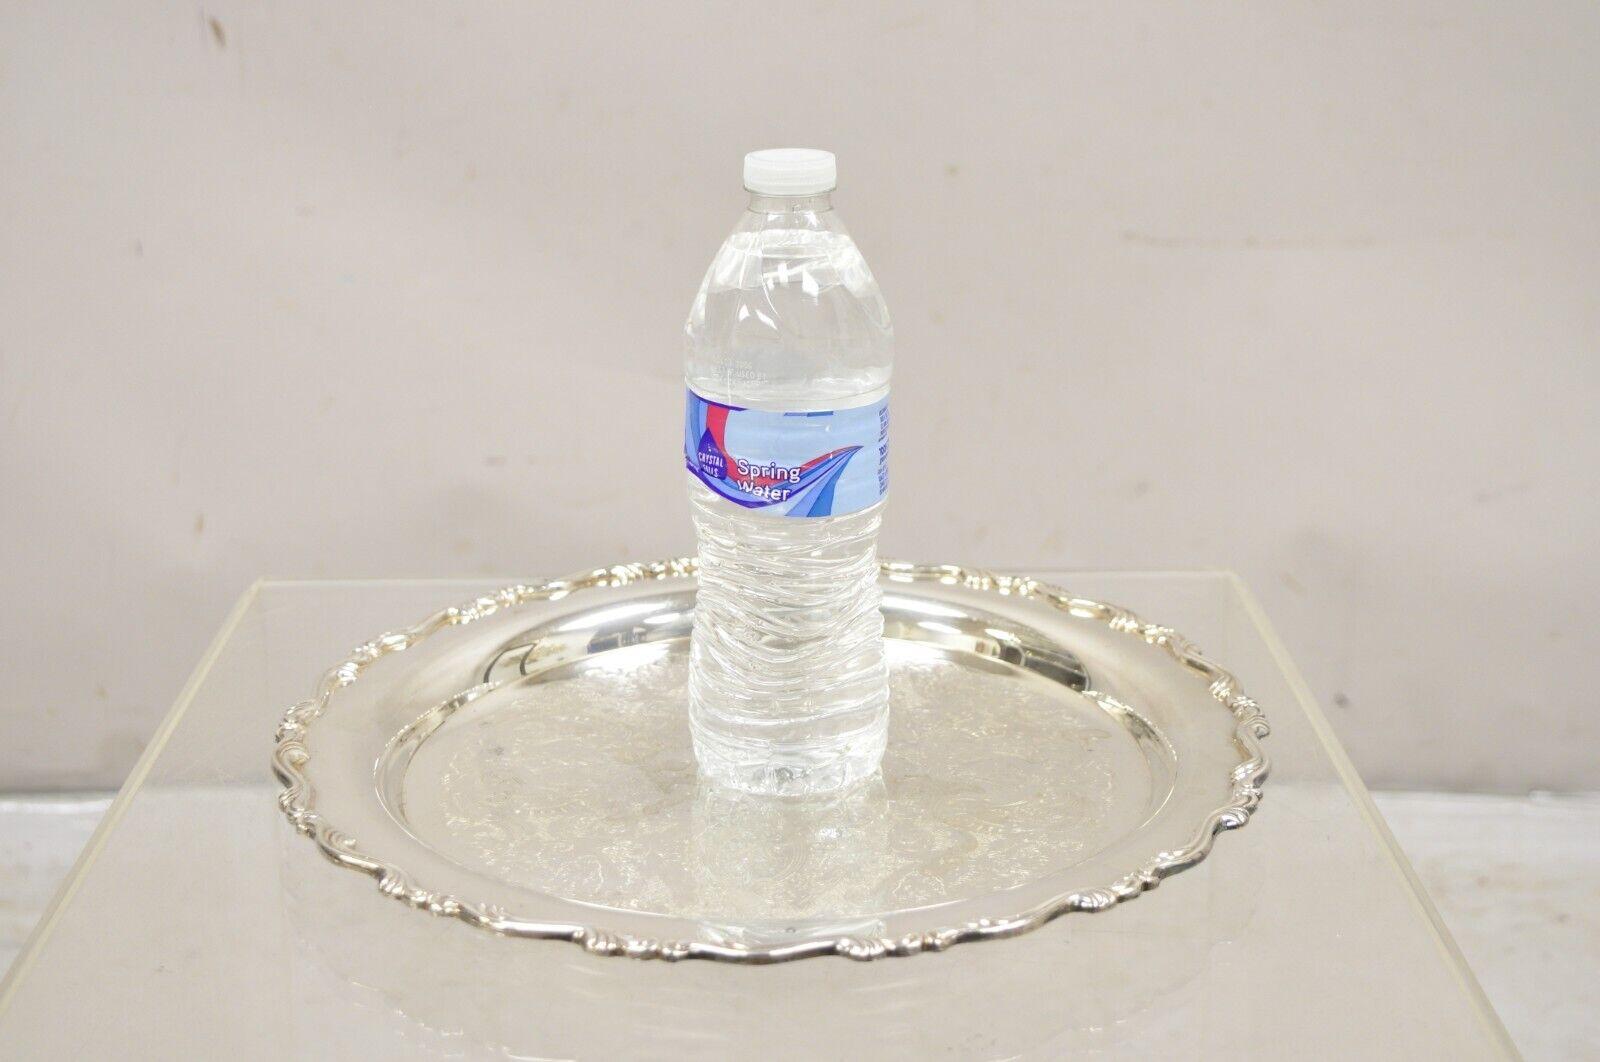 Vintage Oneida Georgian Scroll Silver Plated Round Etched Serving Platter Tray. Circa Late 20th Century. Measurements: 1